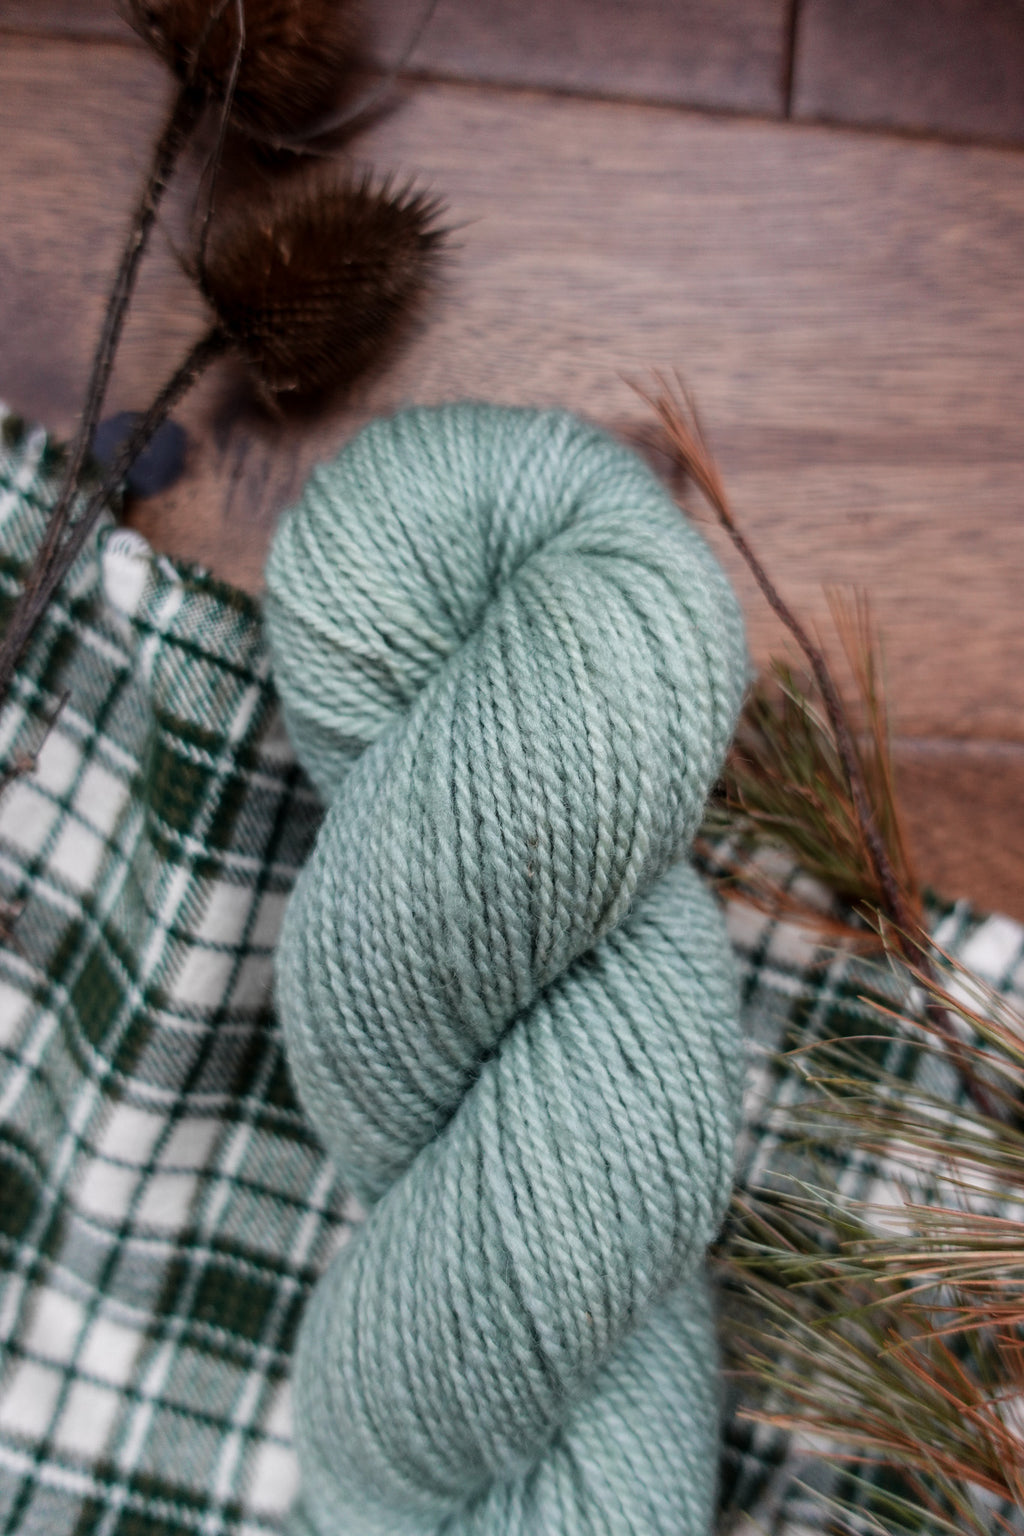 A skein of naturally dyed, light grey yarn lays on a plaid cloth. Dried branches can be seen in the background.